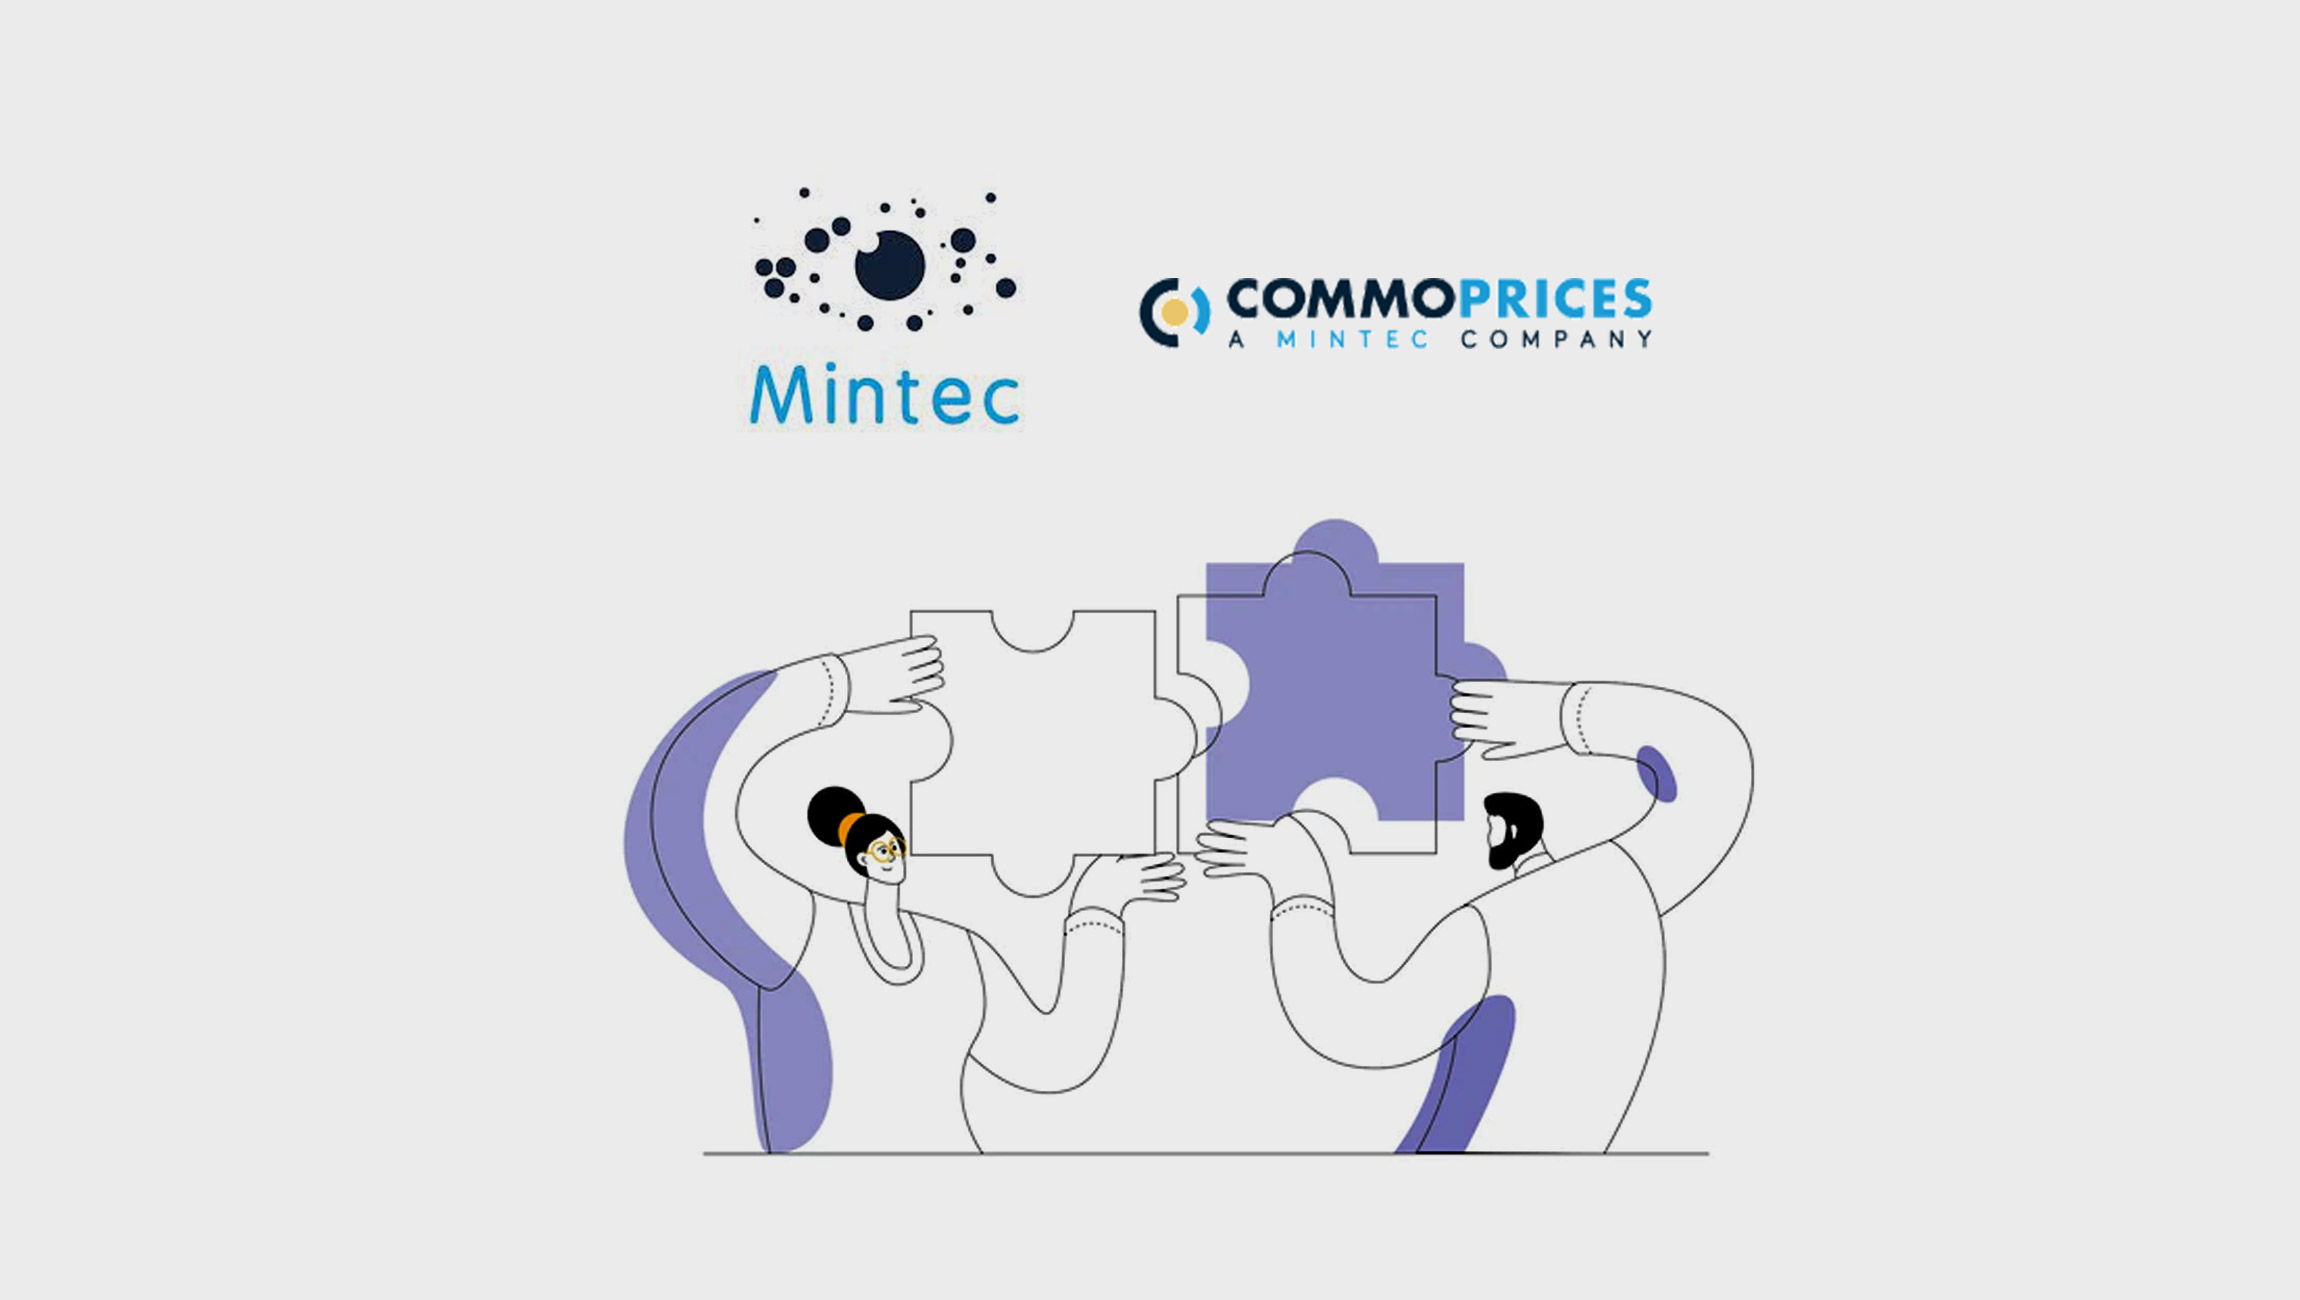 Mintec Acquires CommoPrices To Extend Its Coverage of Commodity Price Data and Intelligence